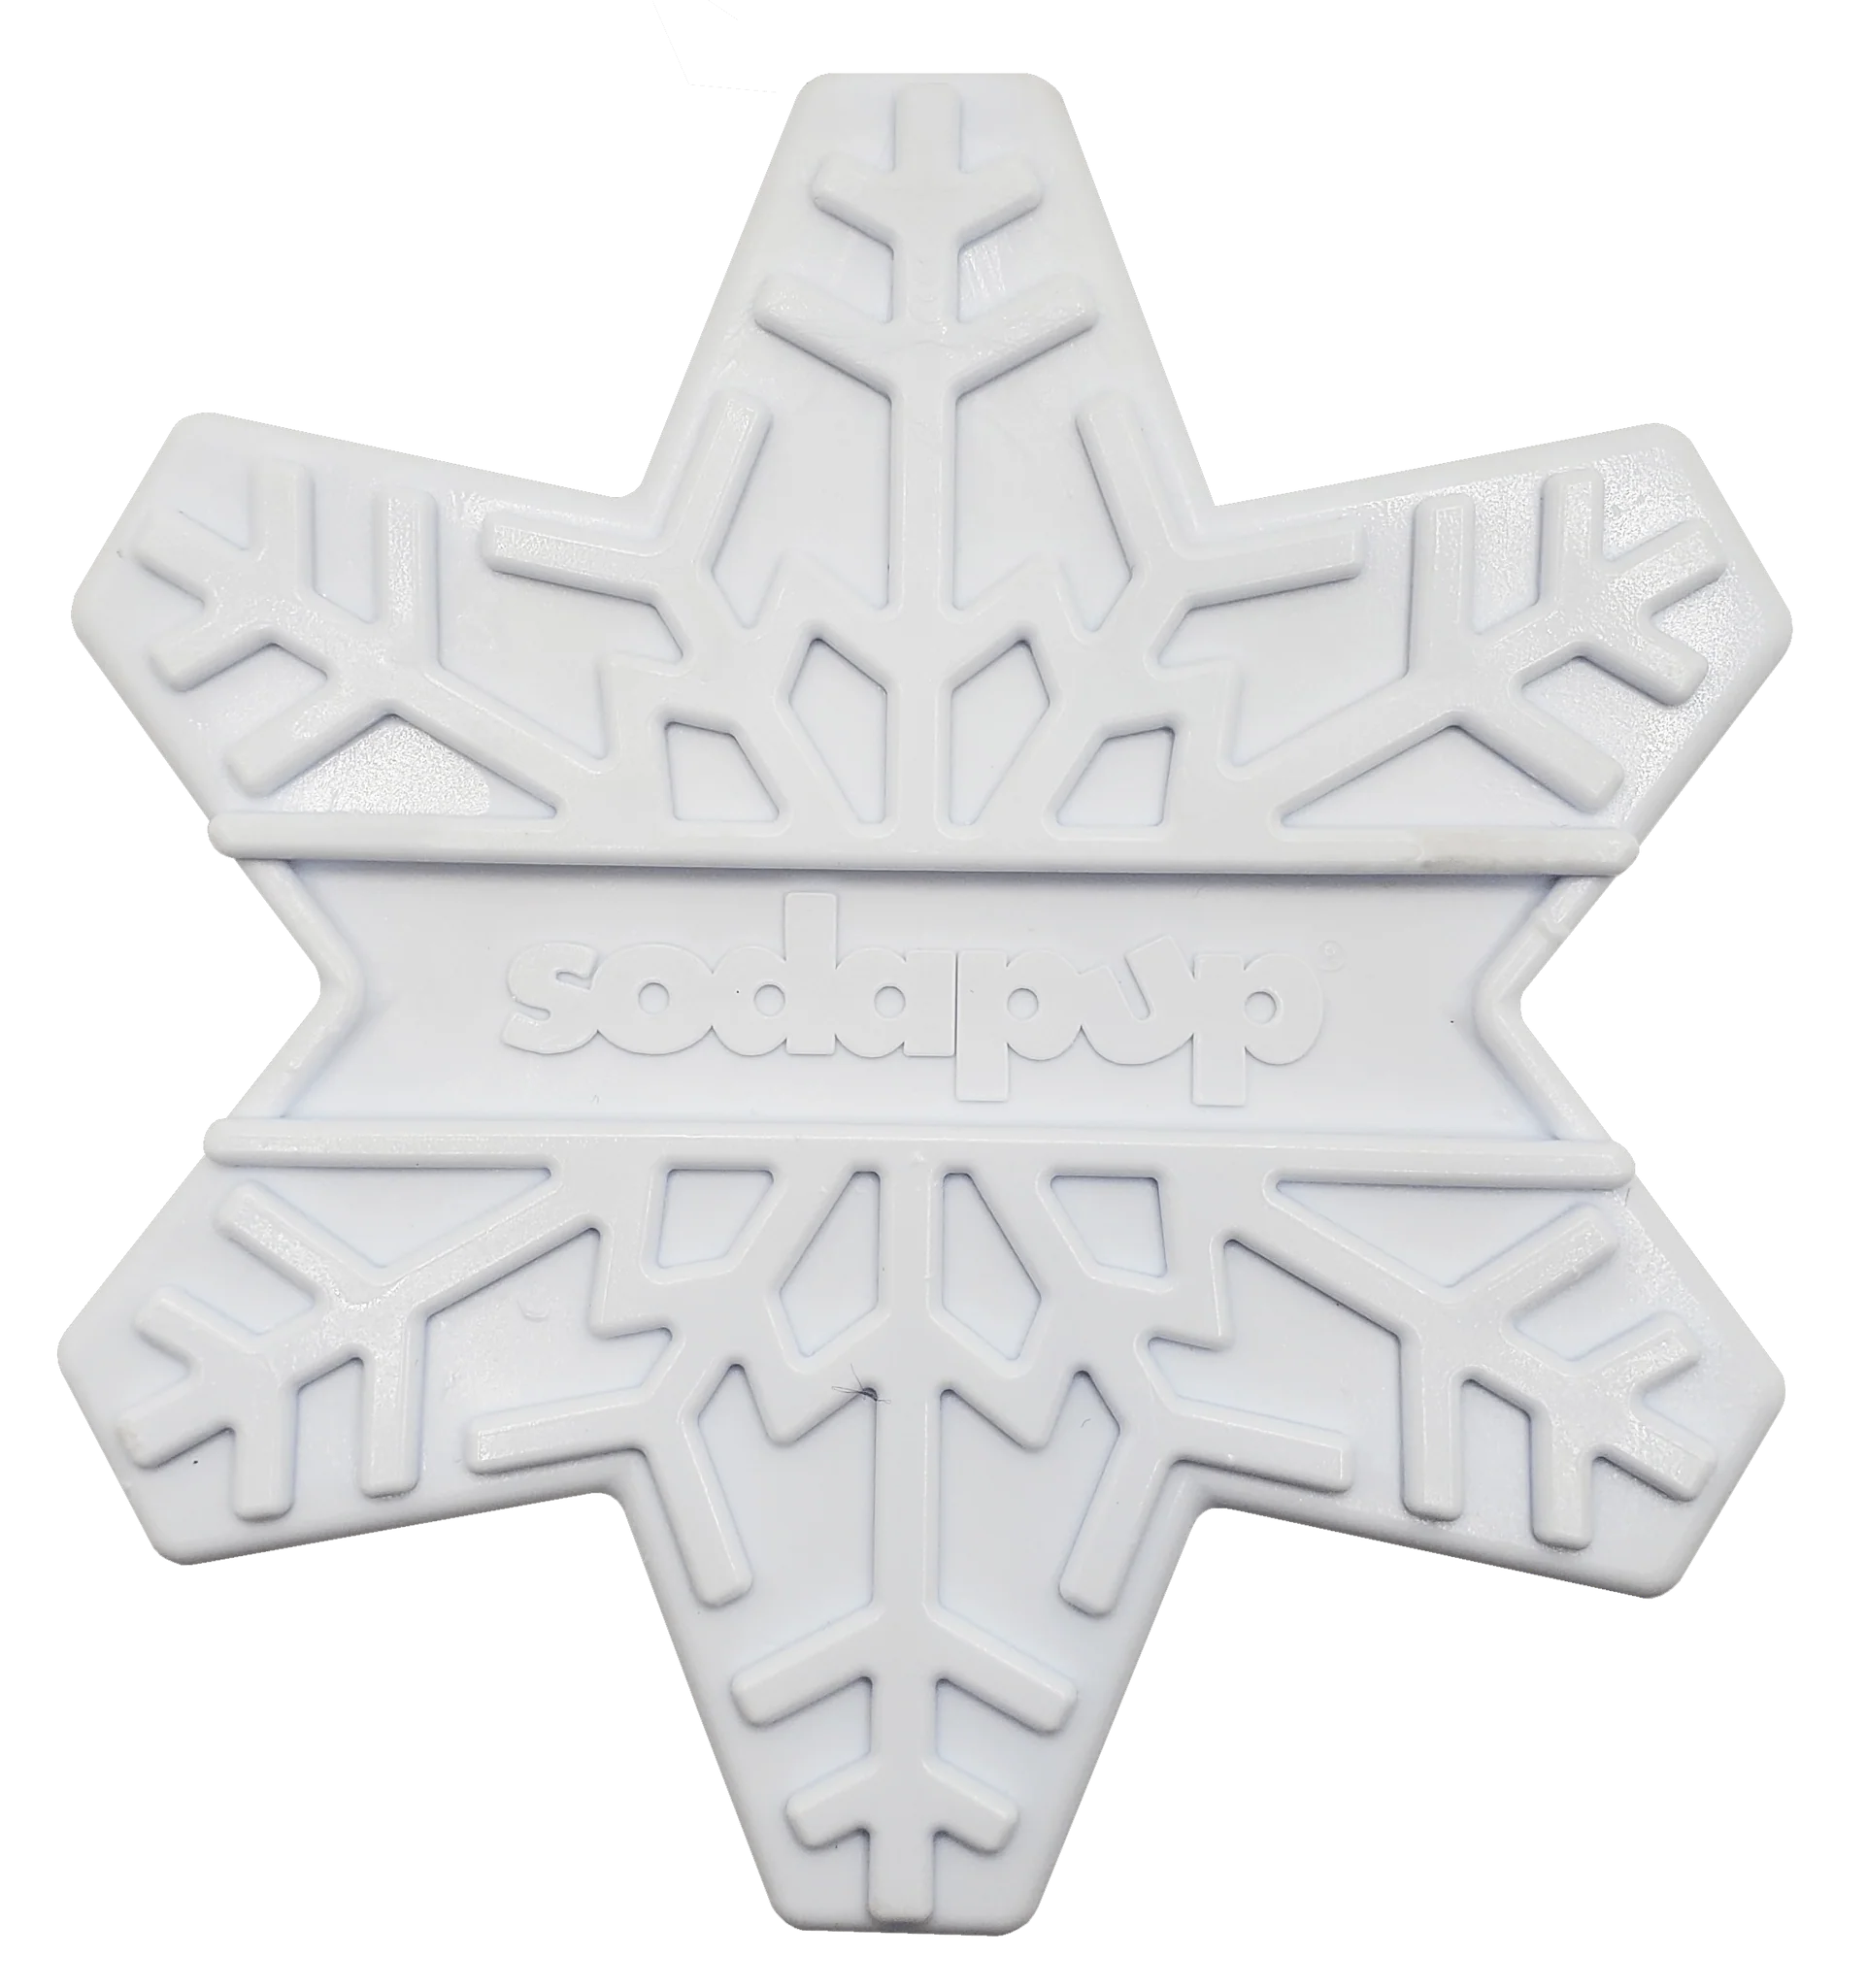 SODAPUP SNOWFLAKE DURABLE DOG CHEW TOY